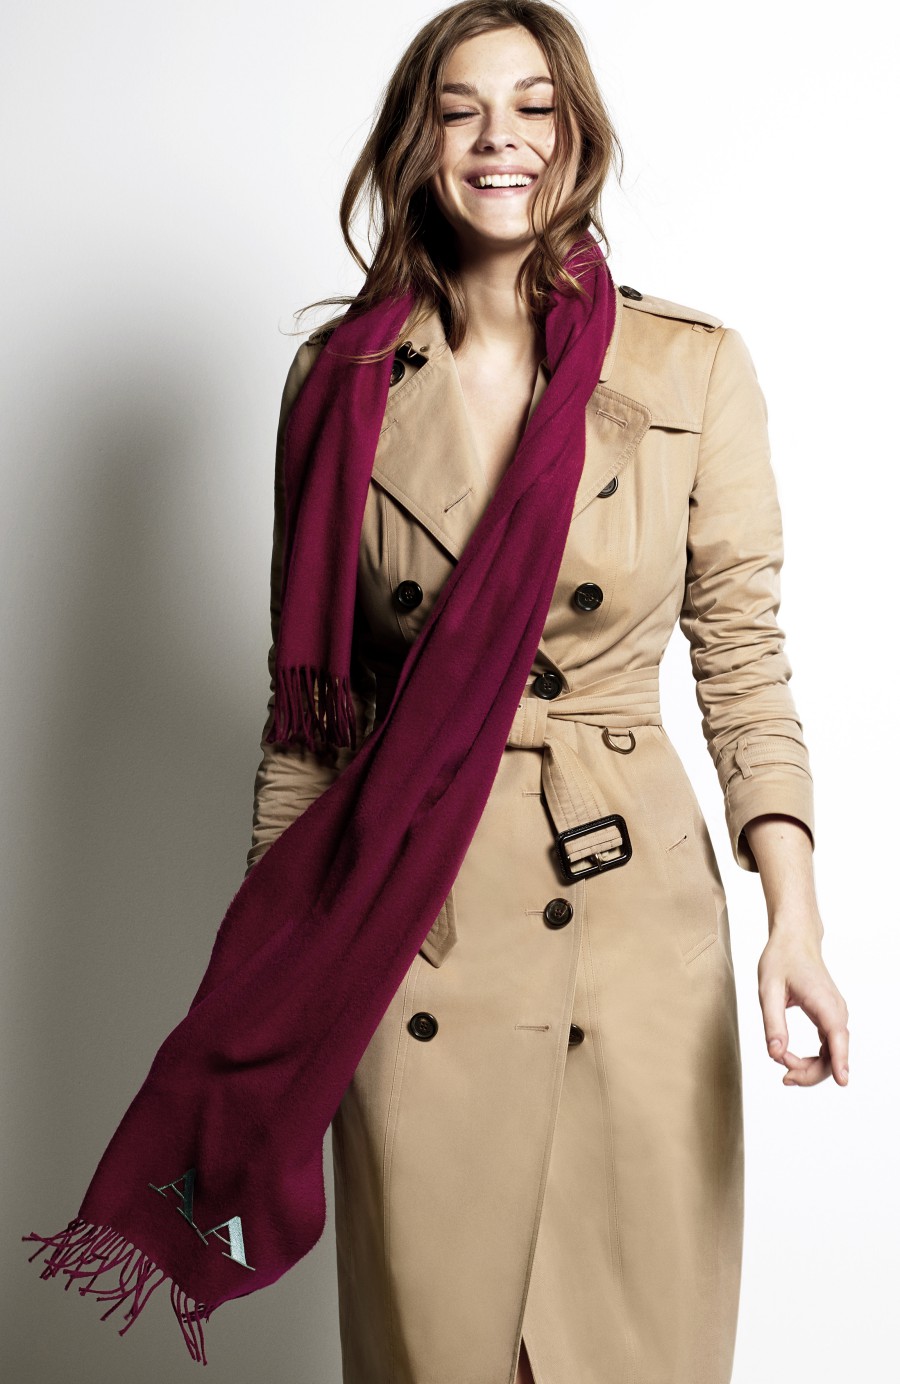 Burberry_Scarf_Styling_-_The_Bandana_step_one_featuring_Amber_Anderson.jpg